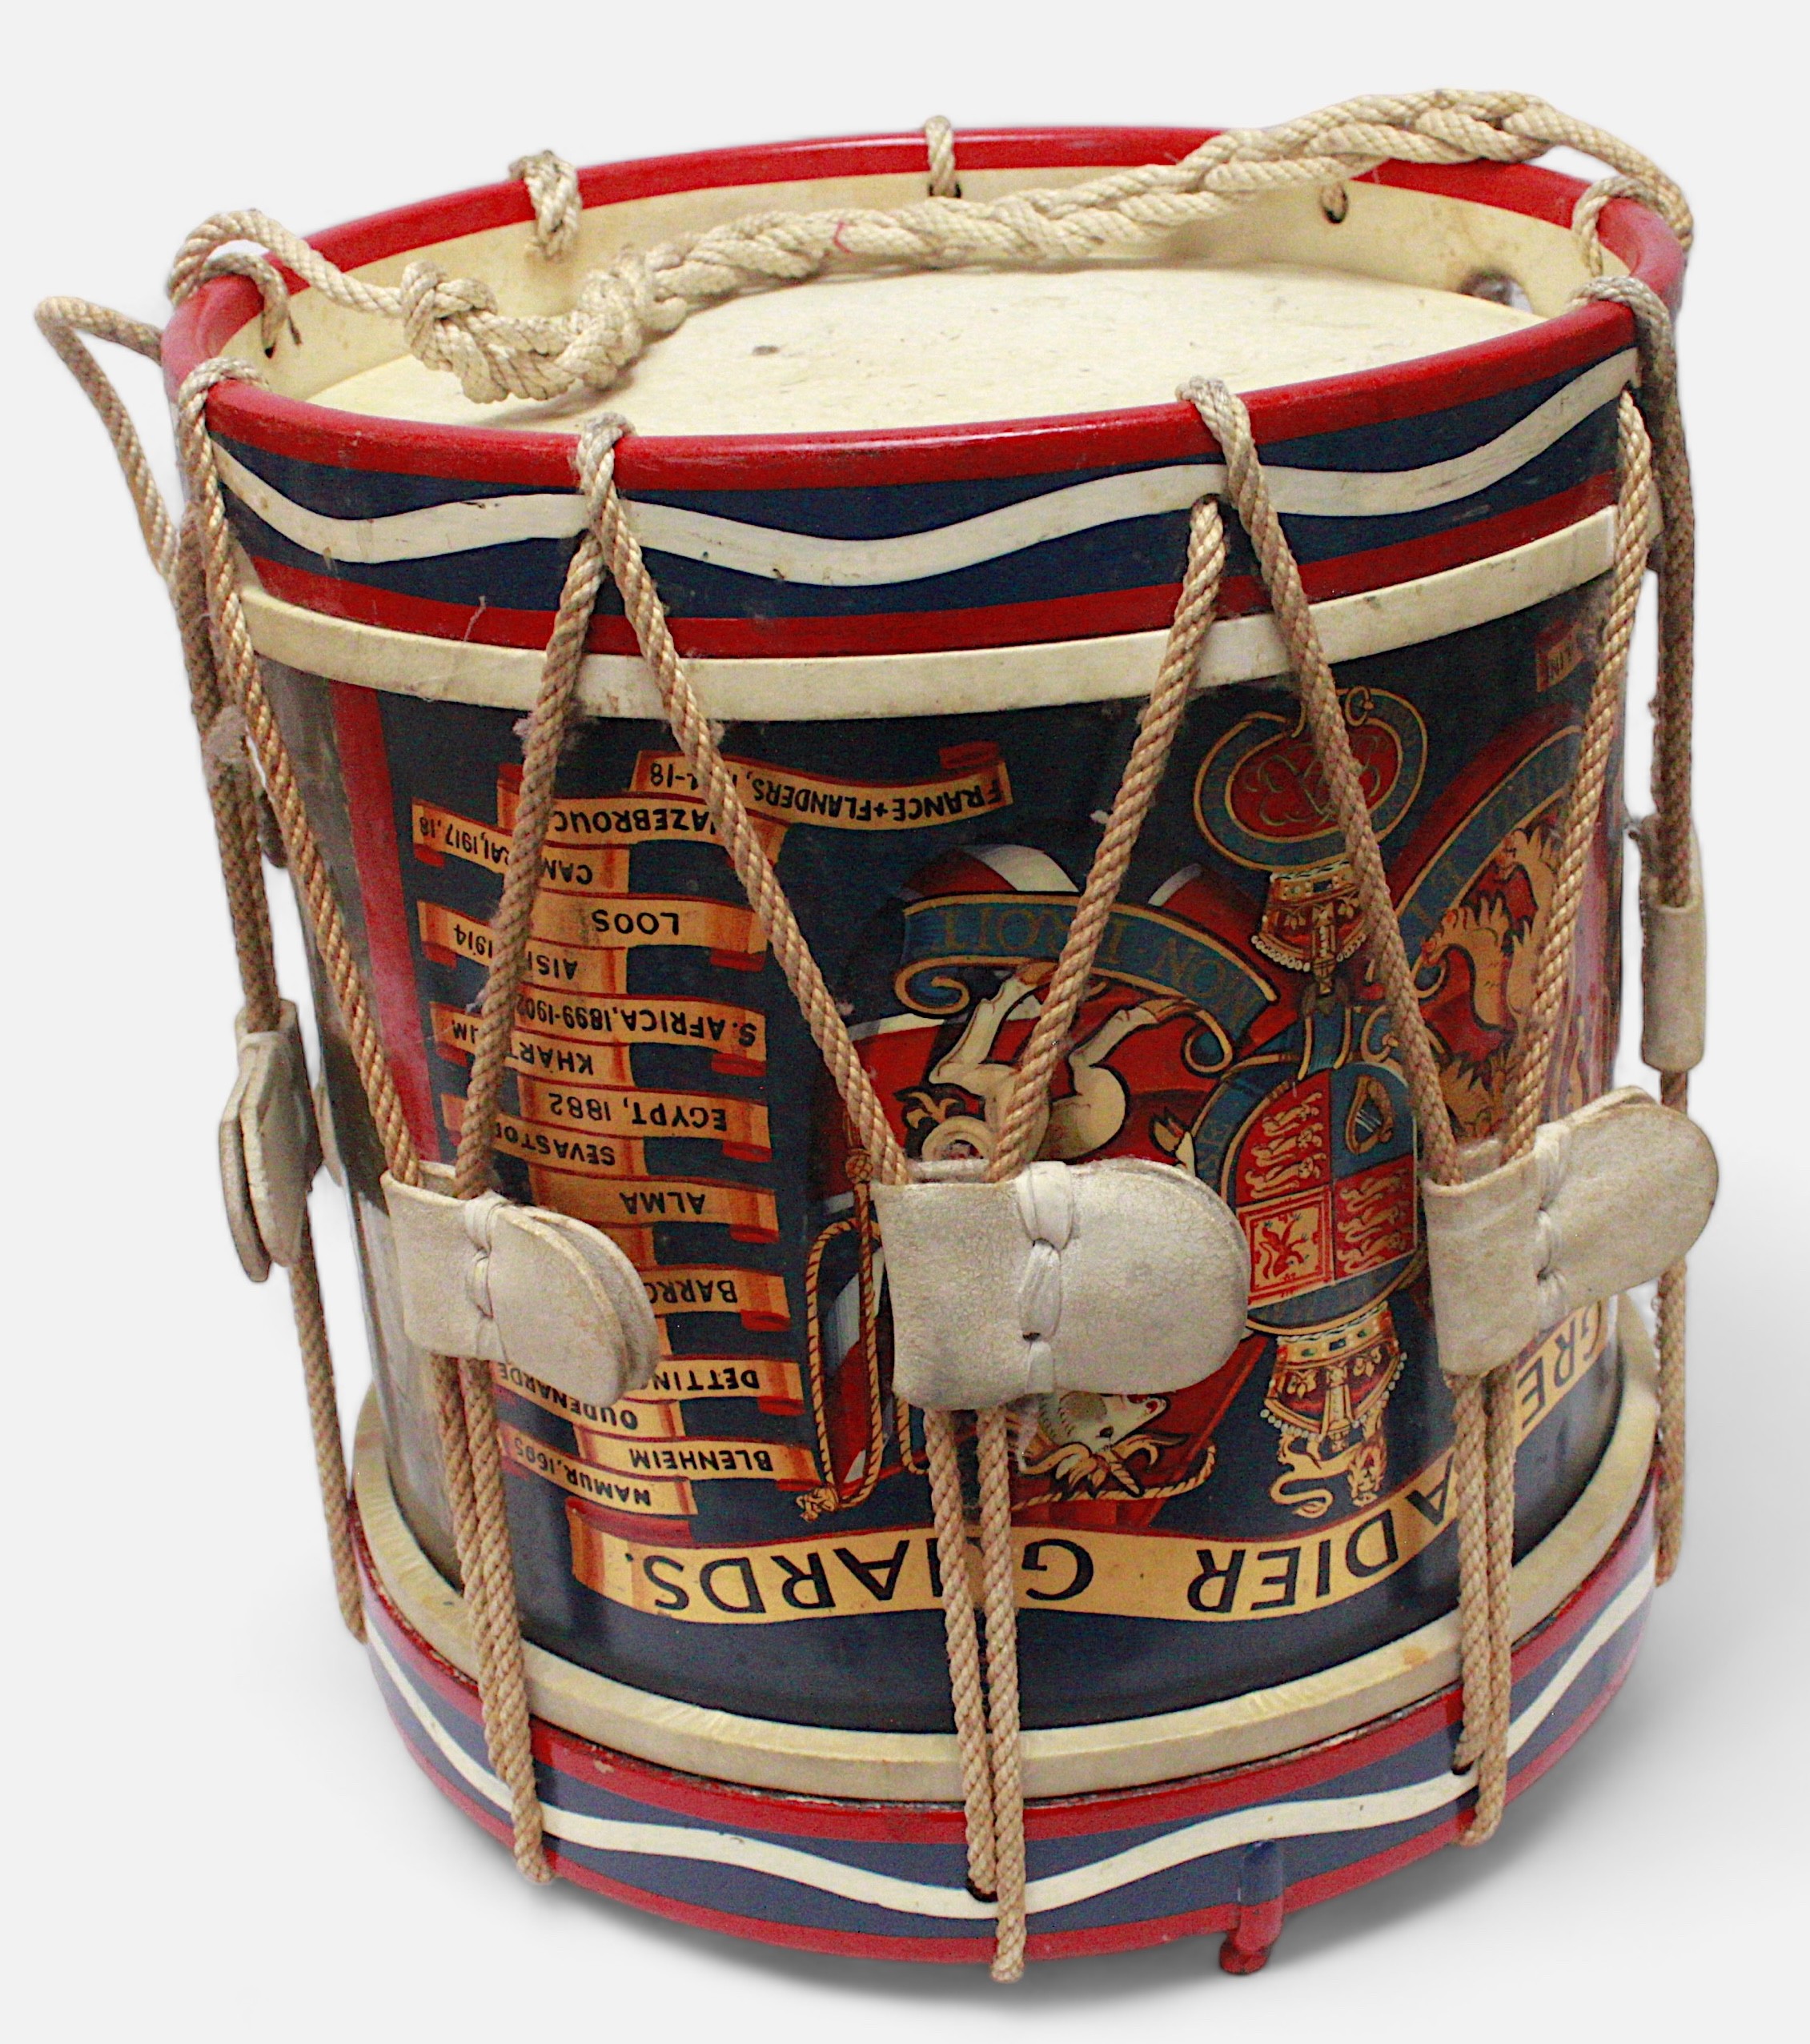 A 20th century Regimental Side Drum for the 1st Battalion Grenadier Guards and painted with Royal